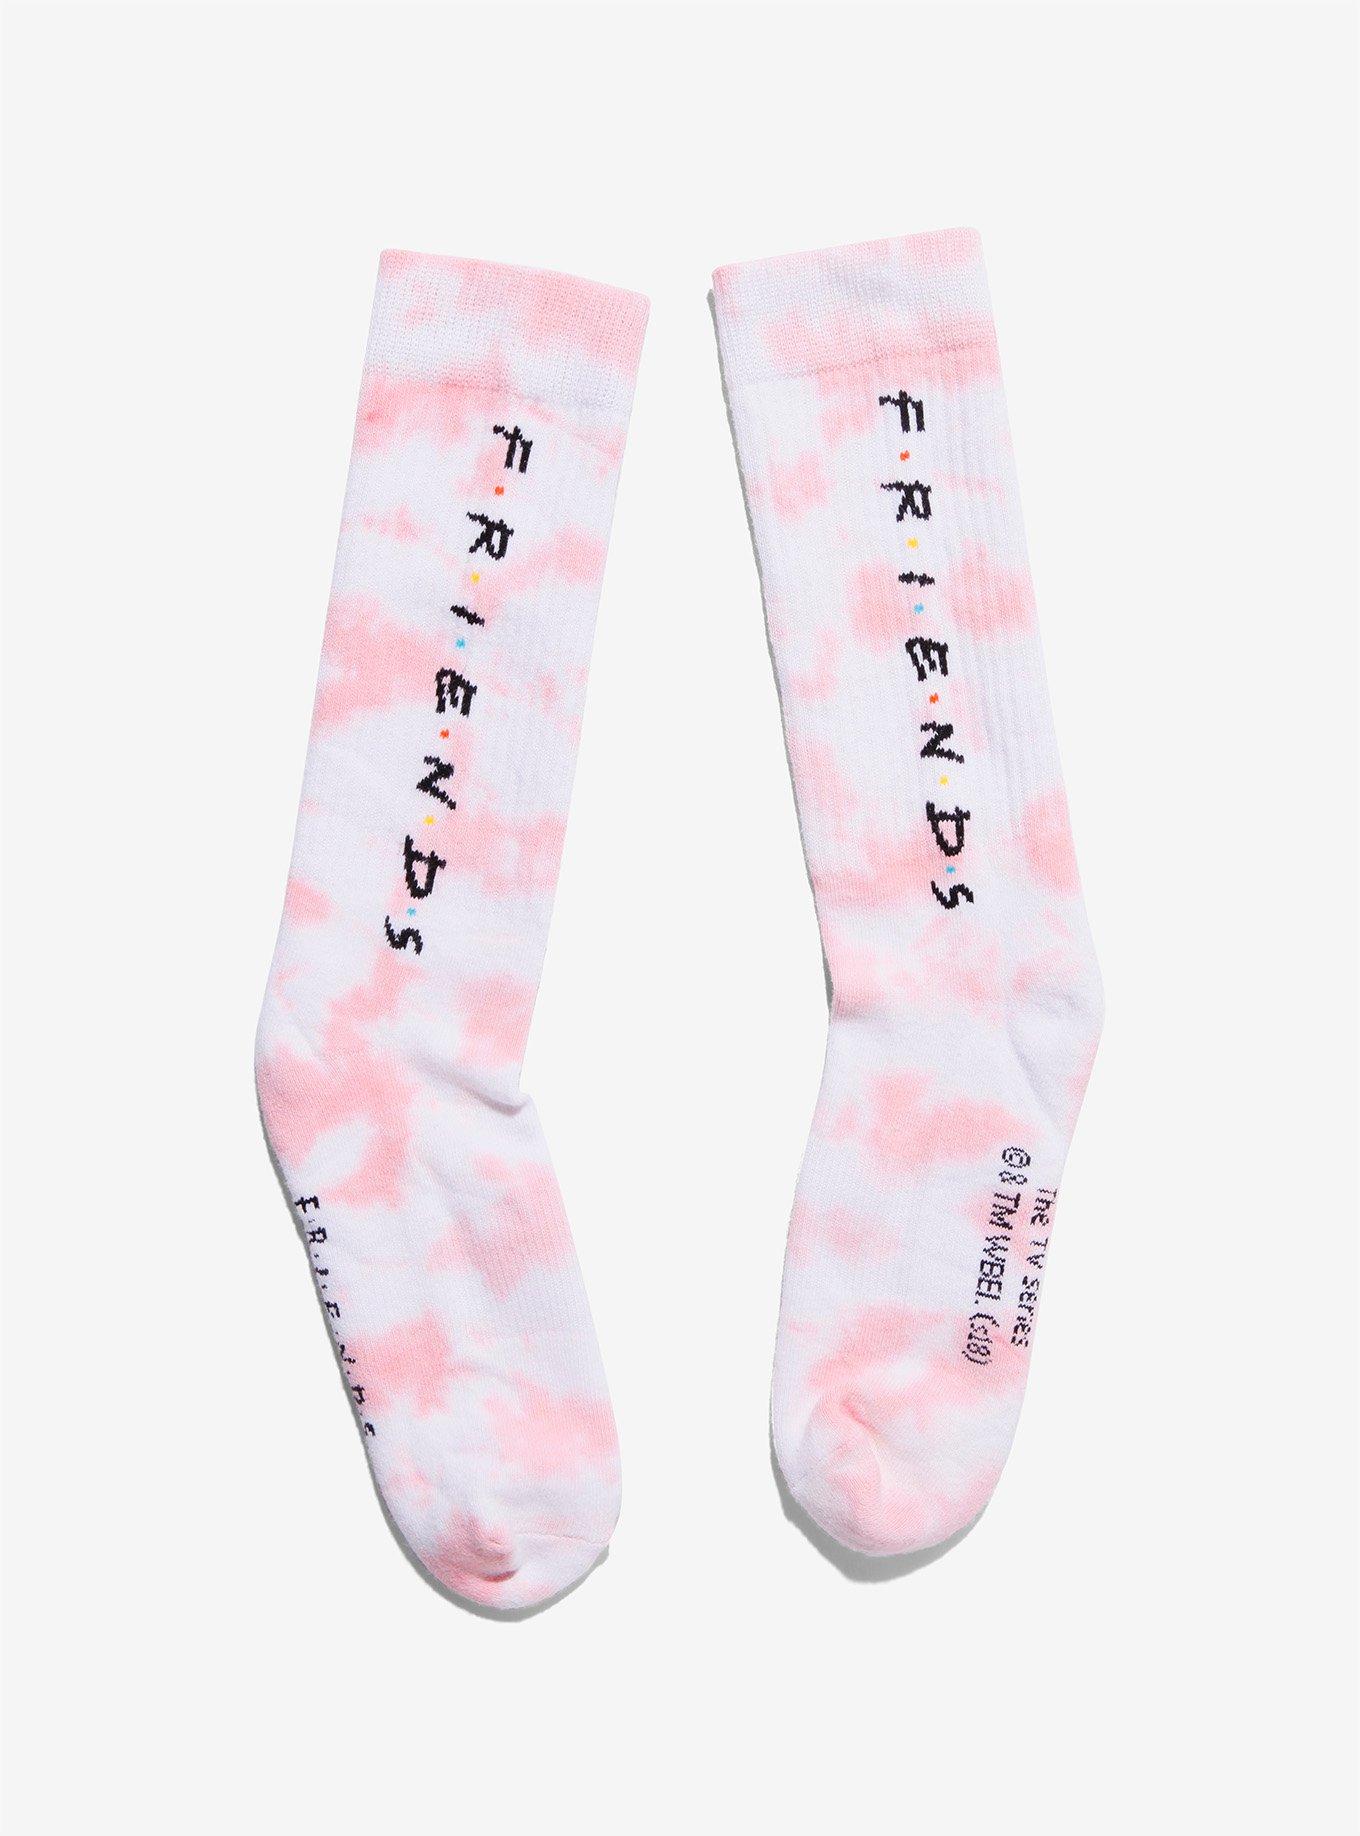 Friends Logo Dyed Socks - BoxLunch Exclusive, , hi-res